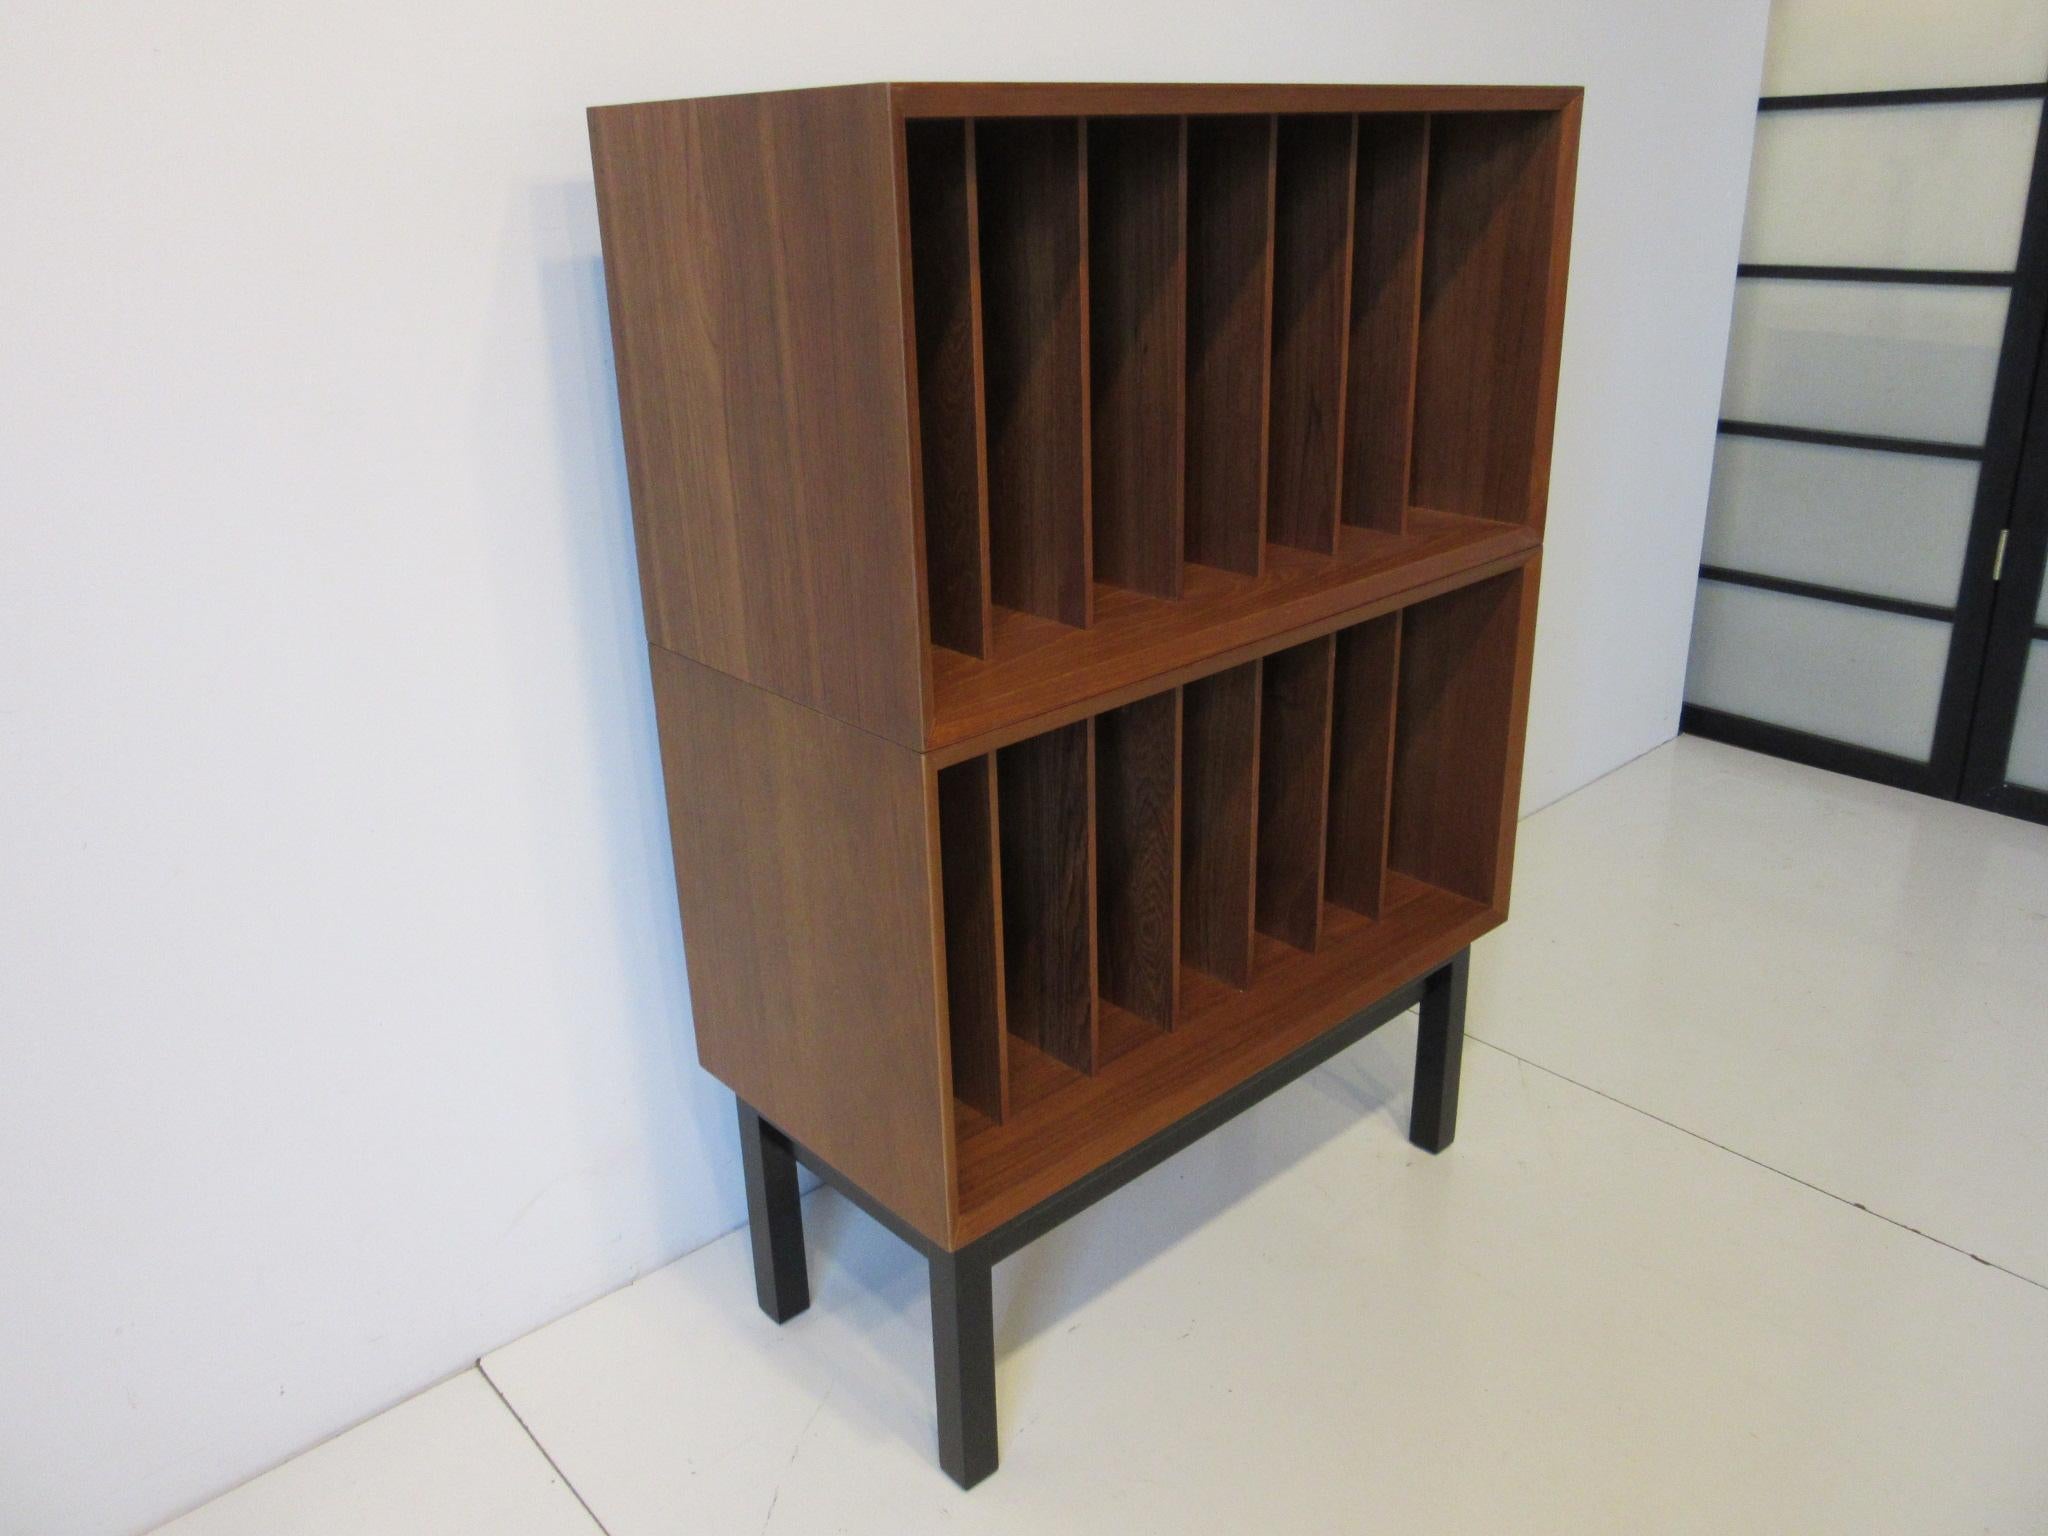 A teak wood Danish record storage cabinet / case with 14 slots at 3.75